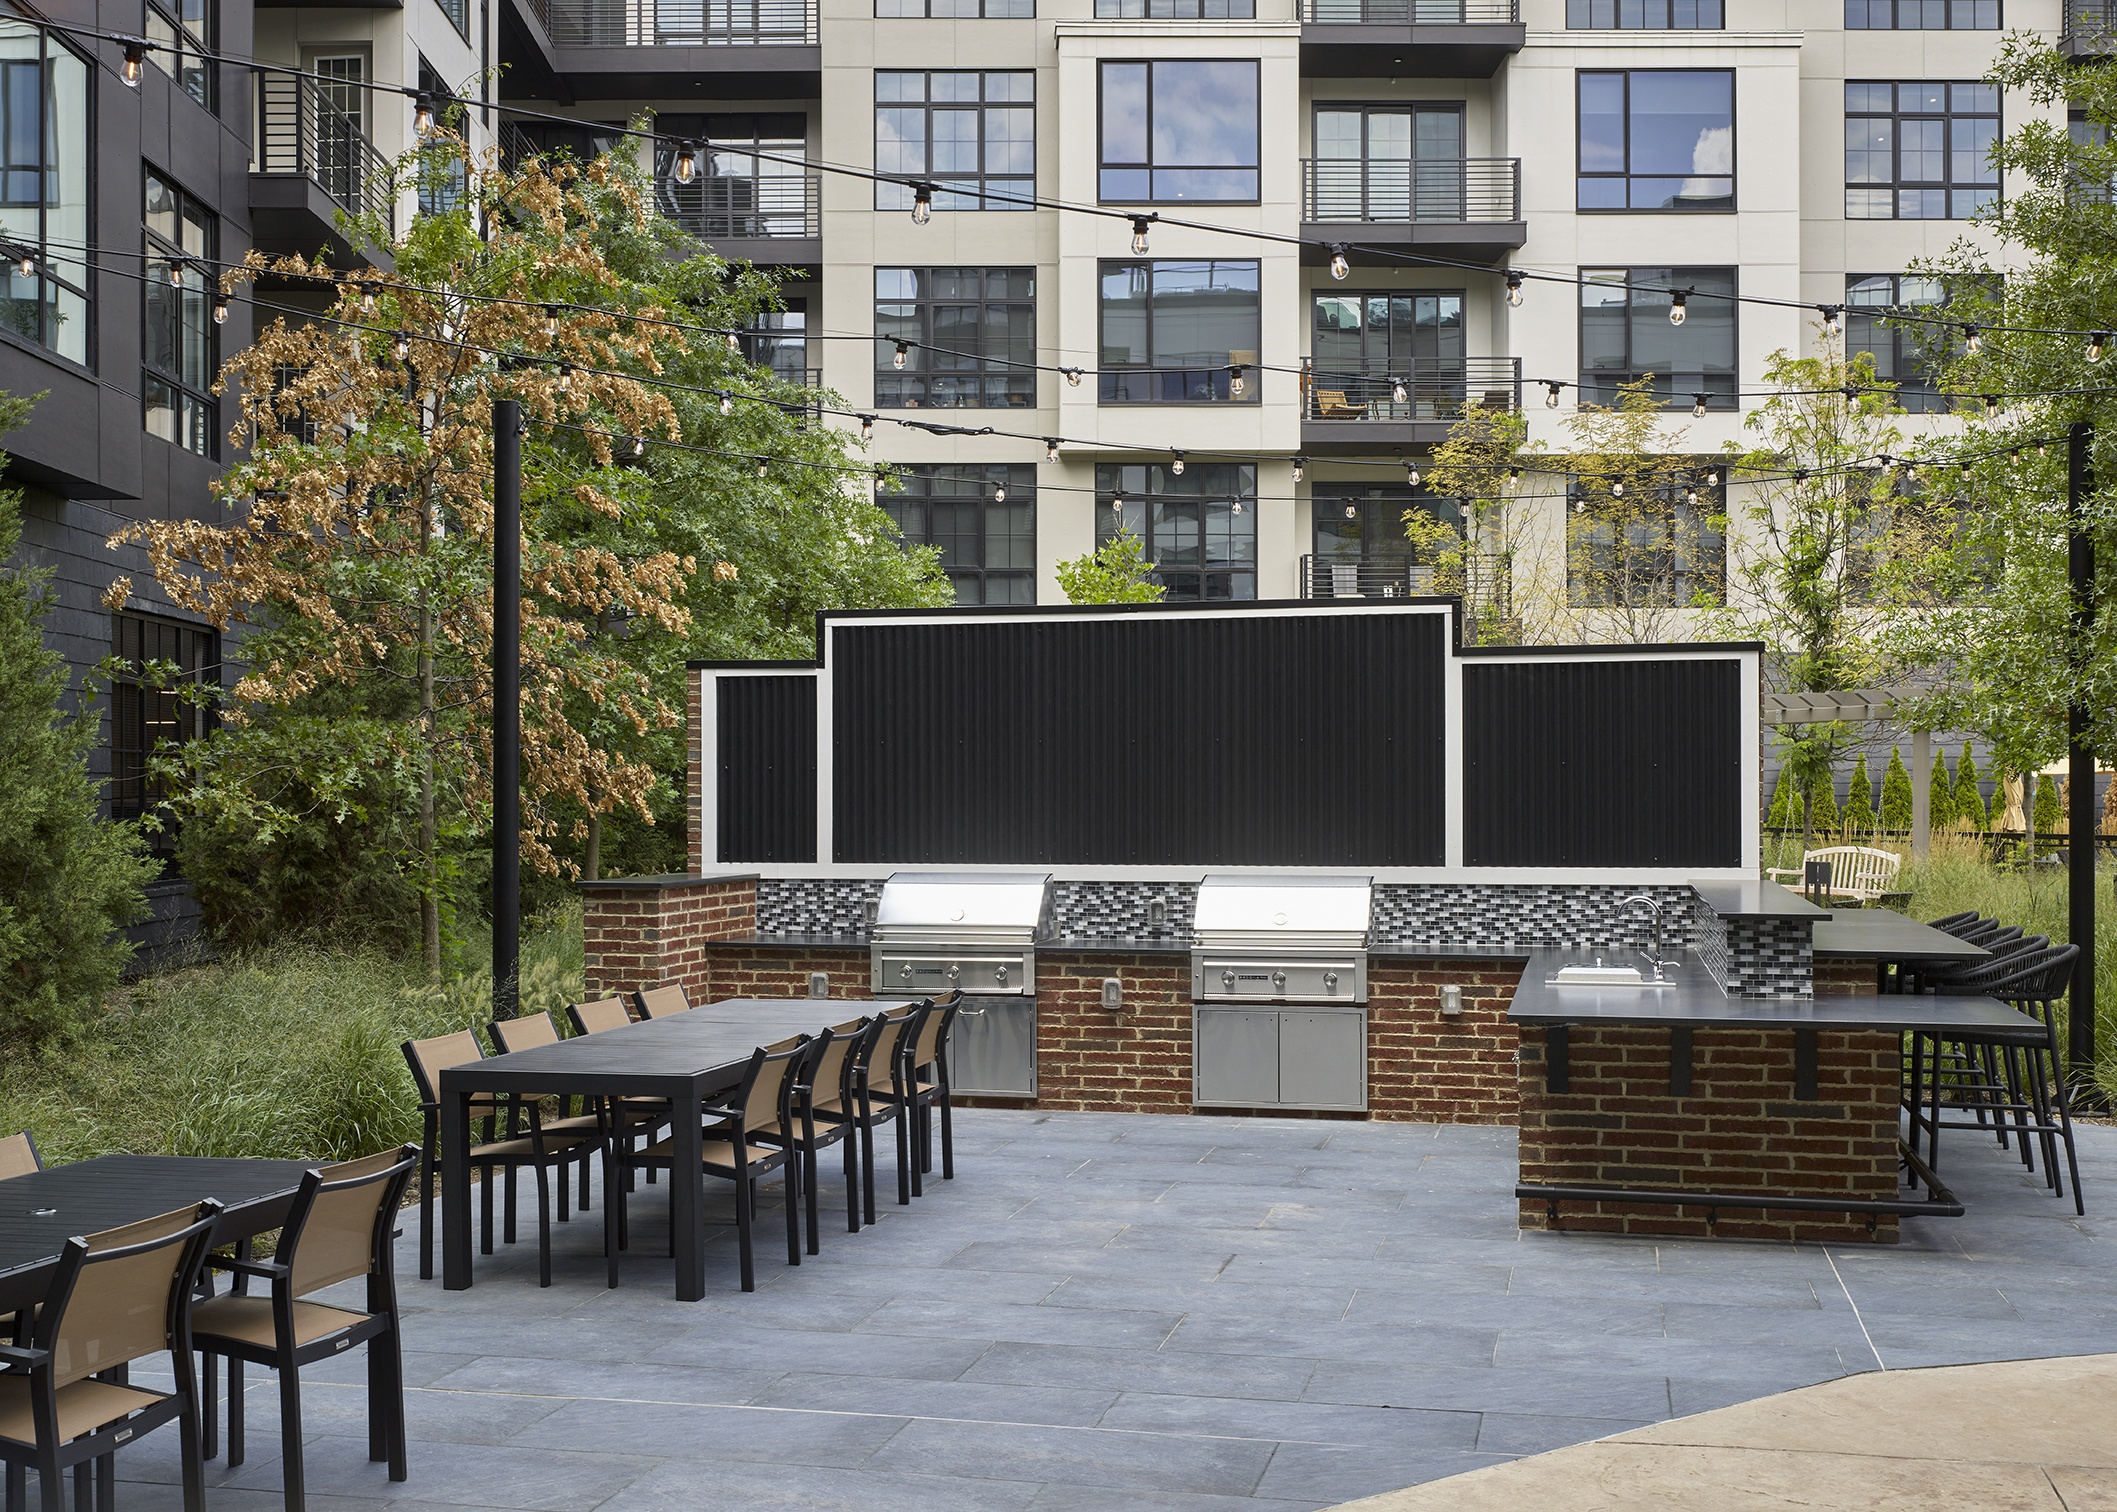 outdoor barbecue, grills, outdoor dining area